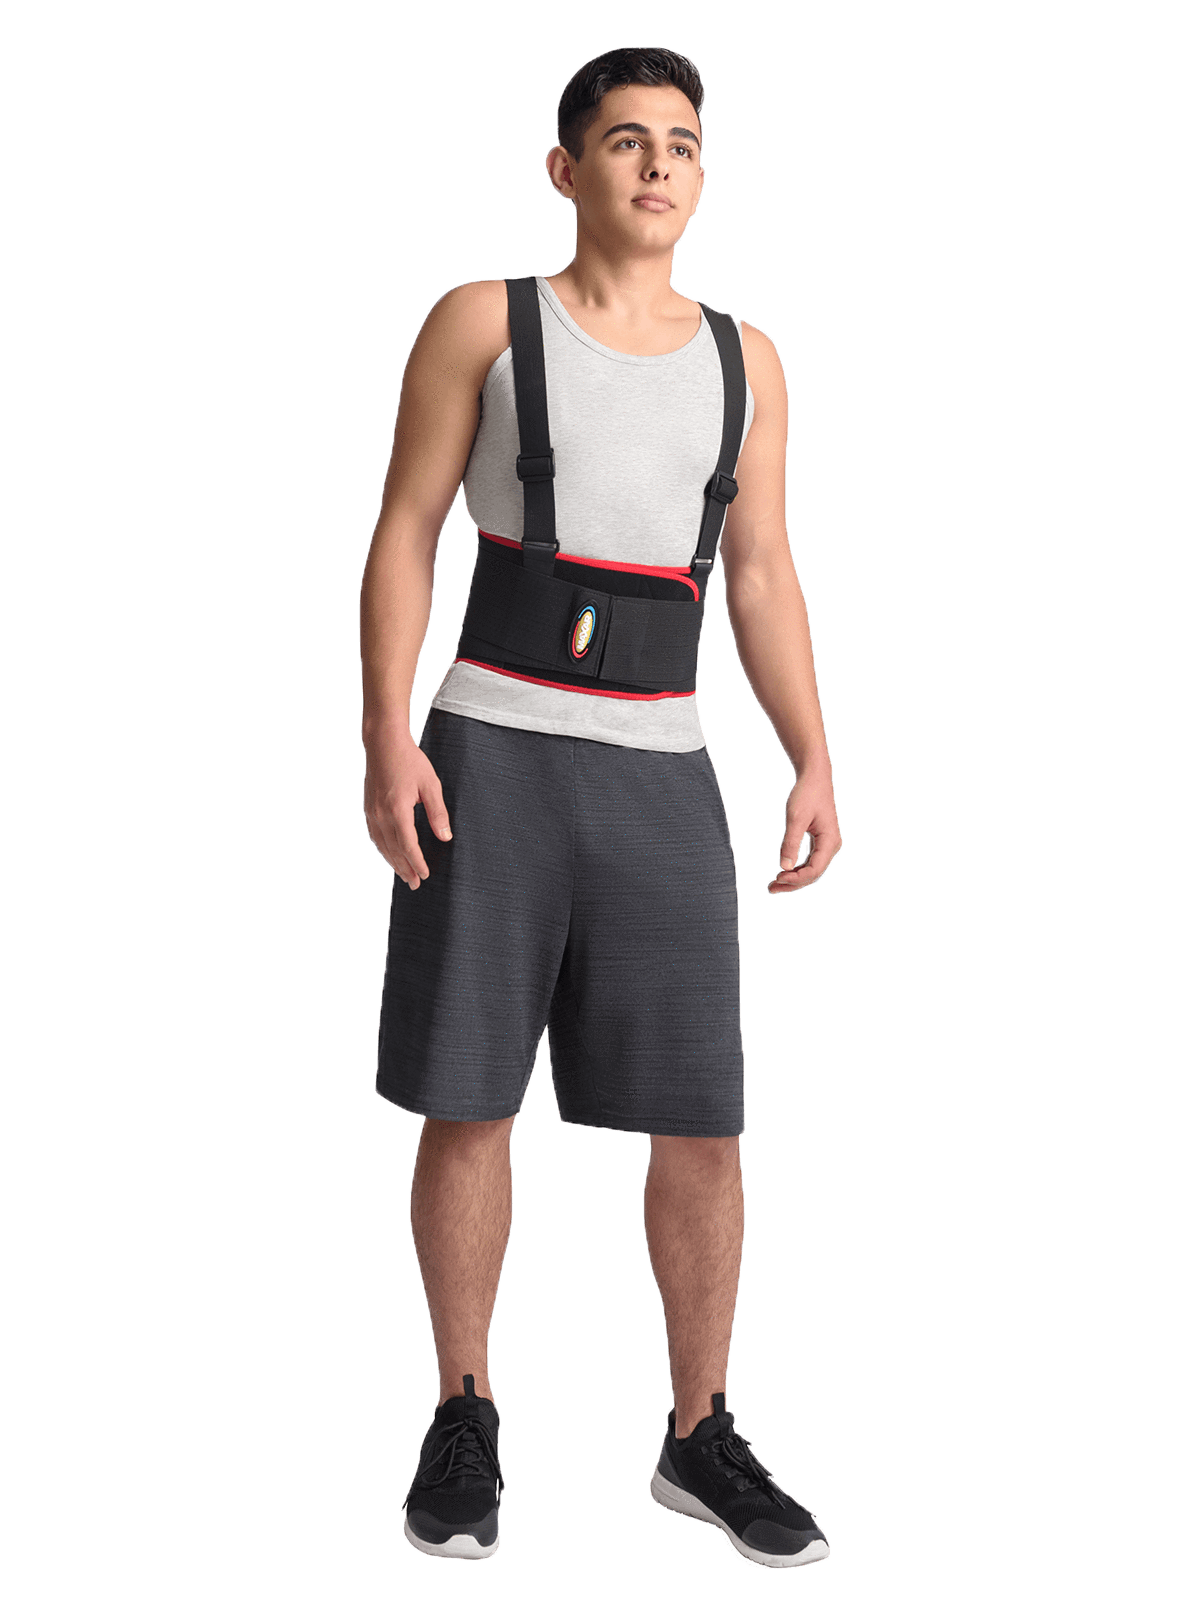 Work Back Brace - Back Support Belt for Lower Back Pain Relief, Heavy  Lifting, Herniated Discs - Industrial Back Brace for Work With Shoulder  Straps